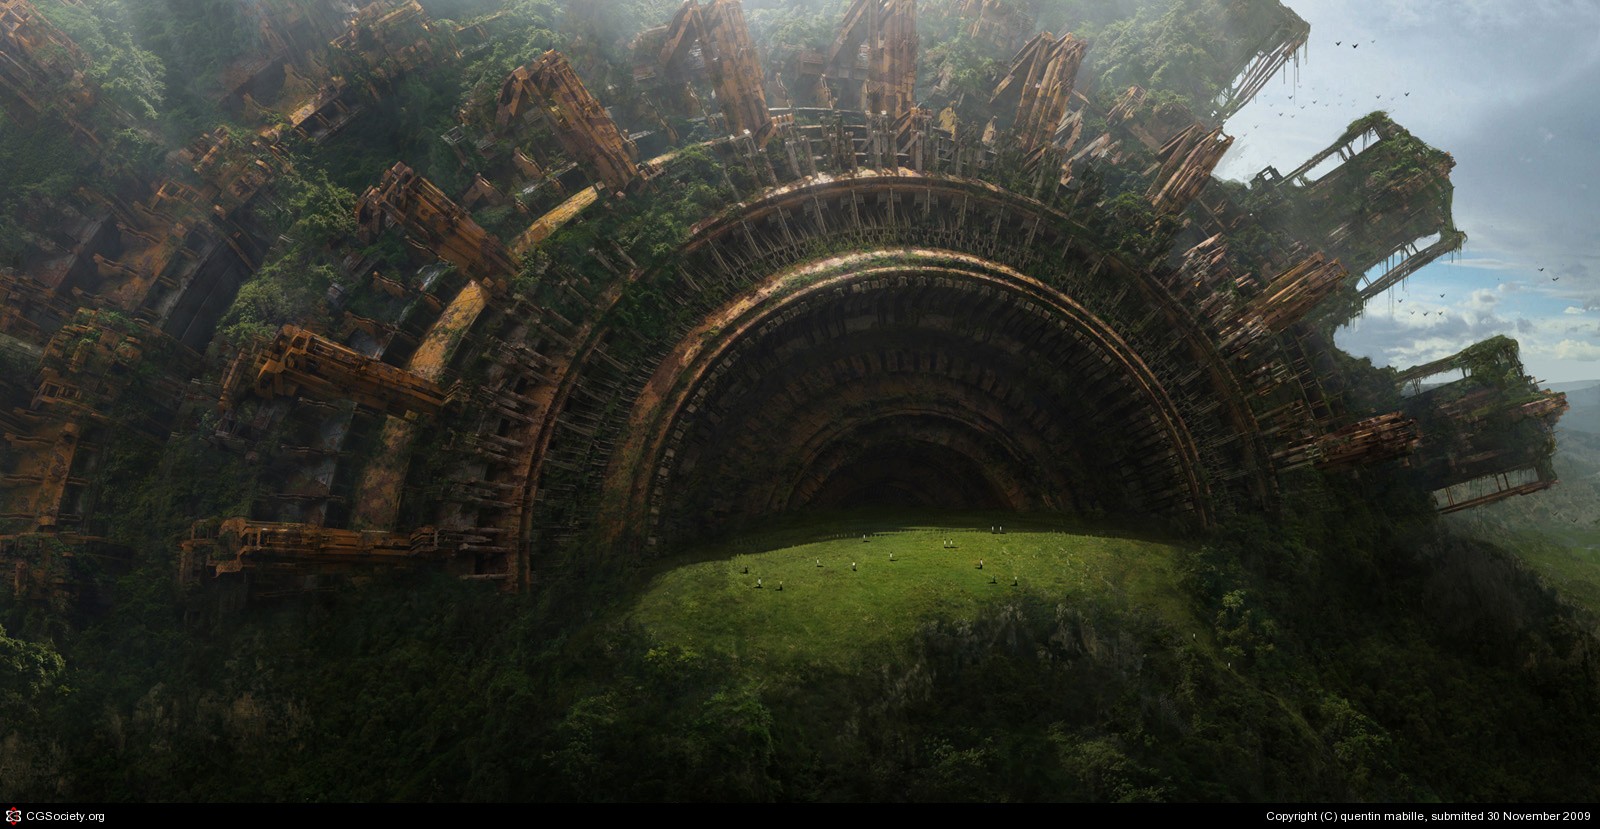 General 1600x829 fantasy art landscape watermarked science fiction 2009 (Year) Quentin Mabille